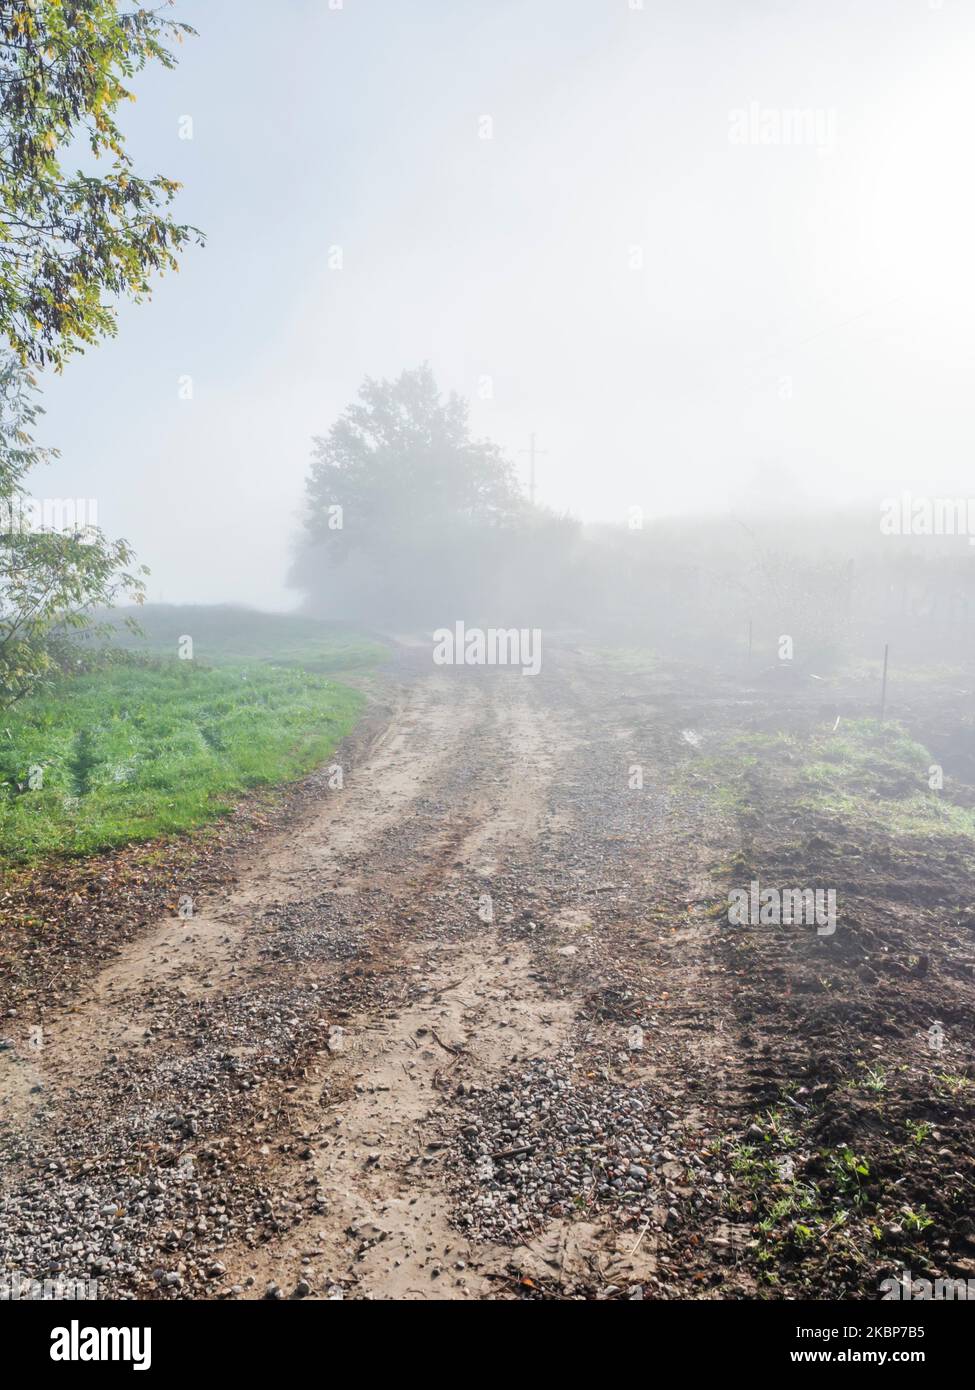 Morning foggy bright sunlight remains of Parenzana Istrian railway now currently country road countryroad near Motovun, Croatia Europe Stock Photo